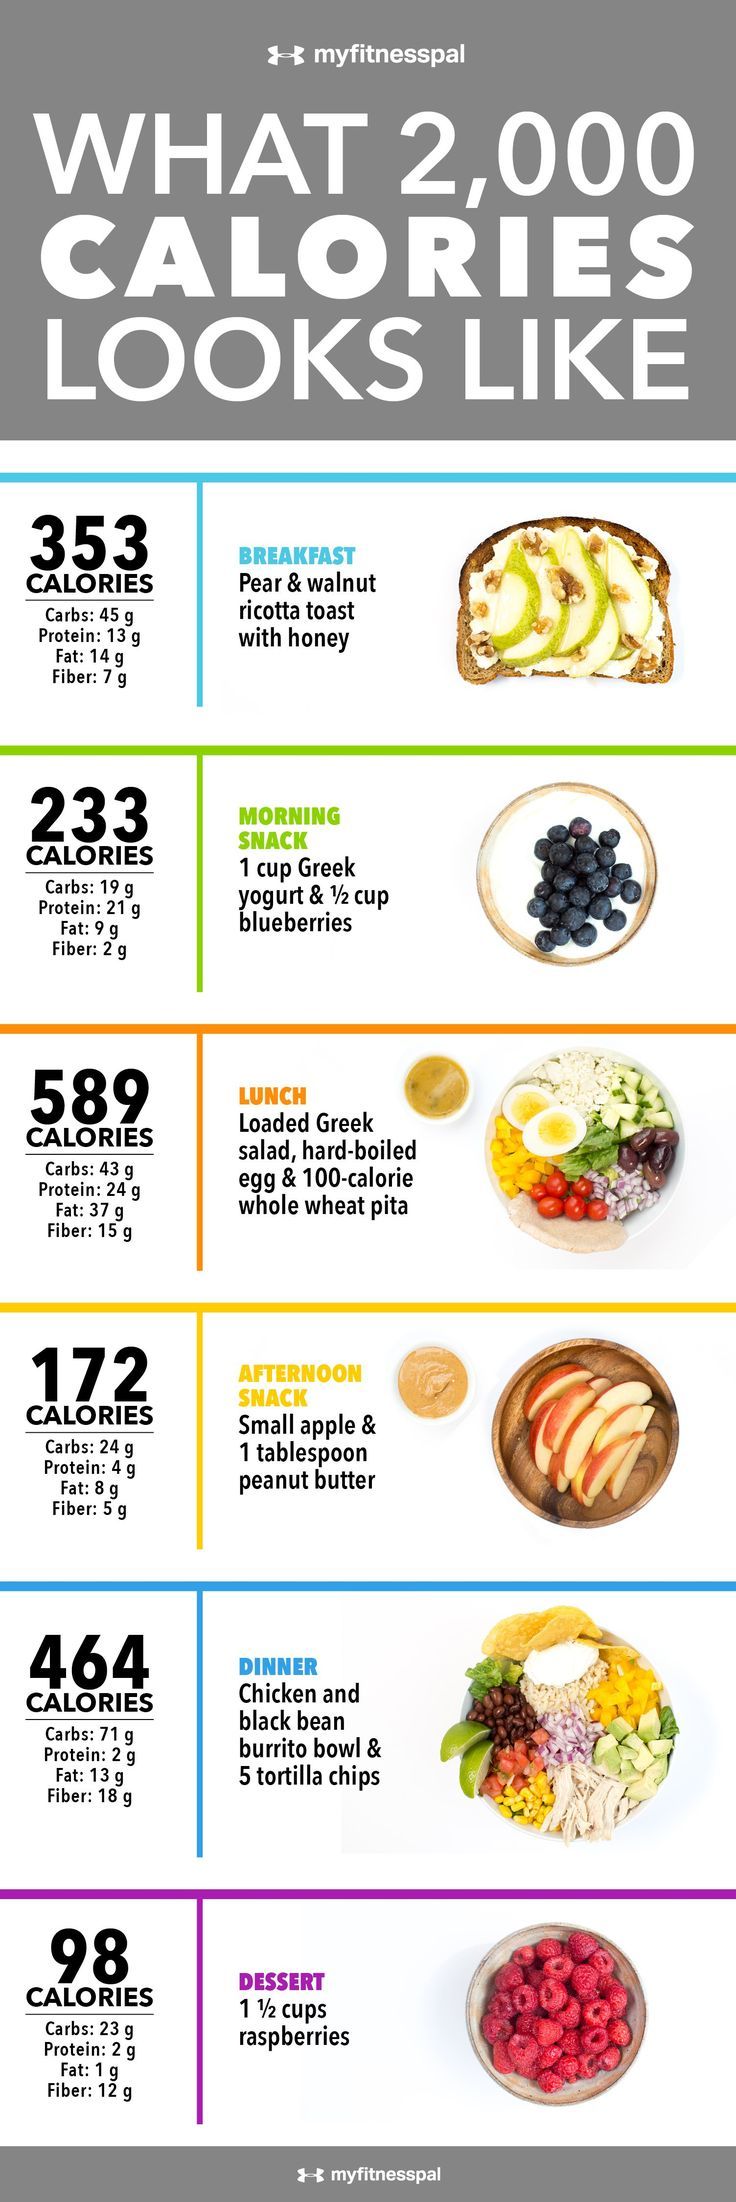 What 2,000 Calories Looks Like | Weight Loss | MyFitnessPal